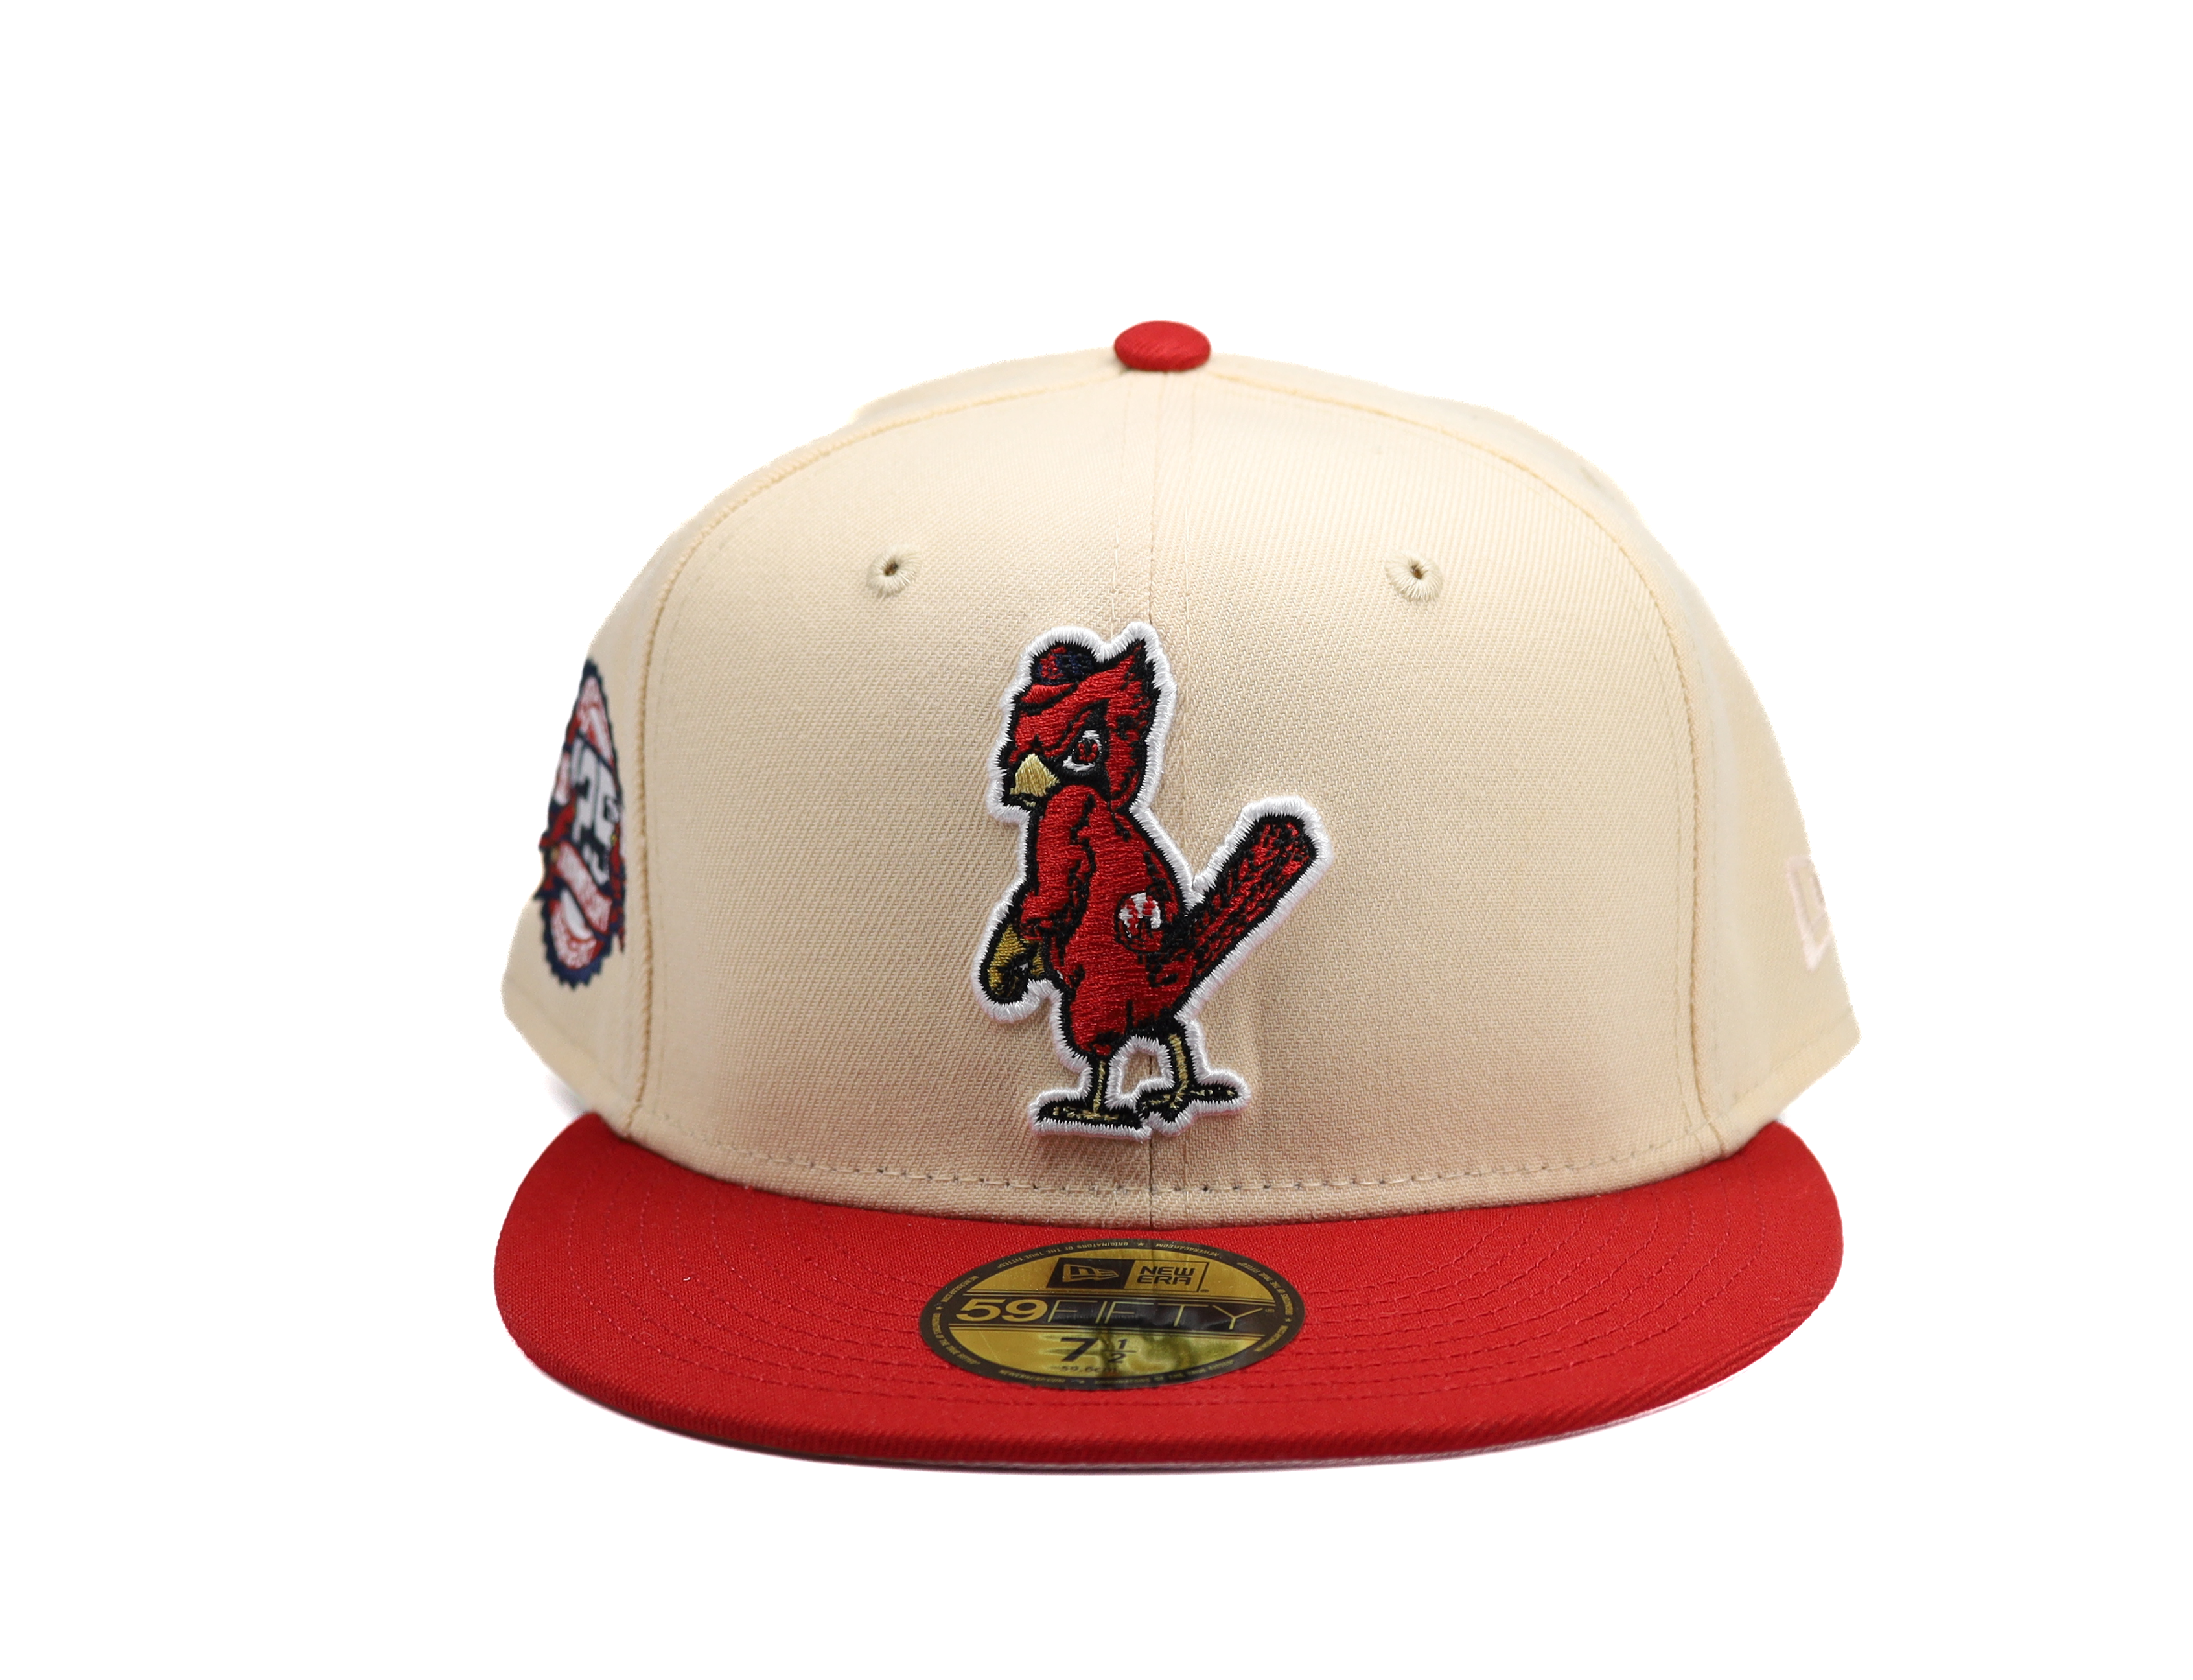 New Era 59FIFTY St Louis Cardinals 100th Anniversary Patch Hat - Navy, Red Navy/Red / 7 1/4